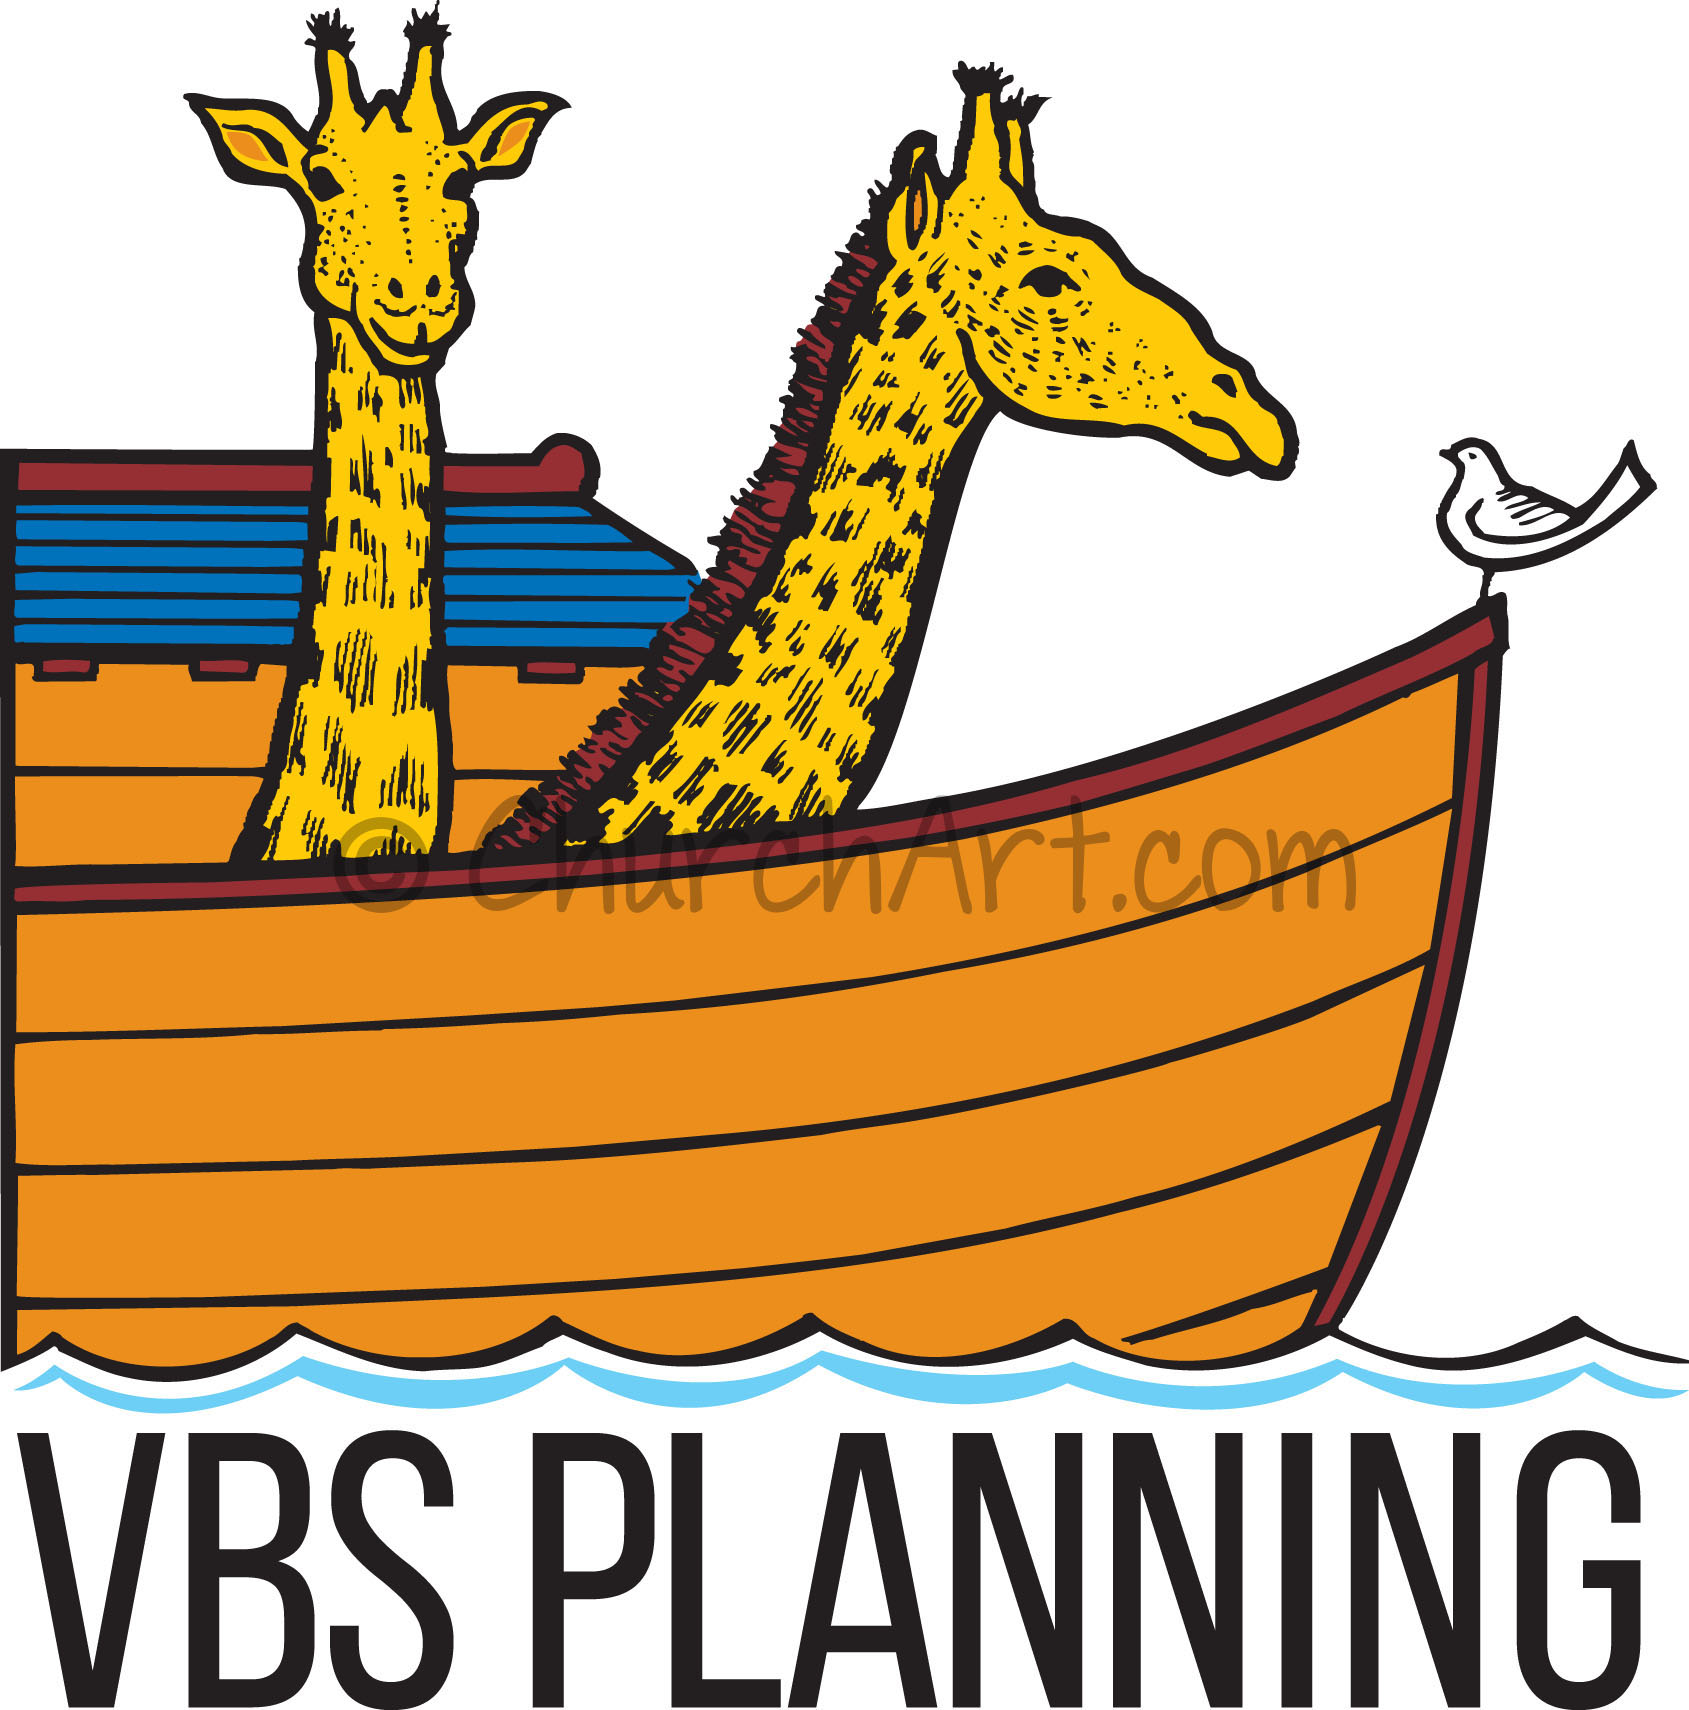 VBS Planning image using Bible story characters